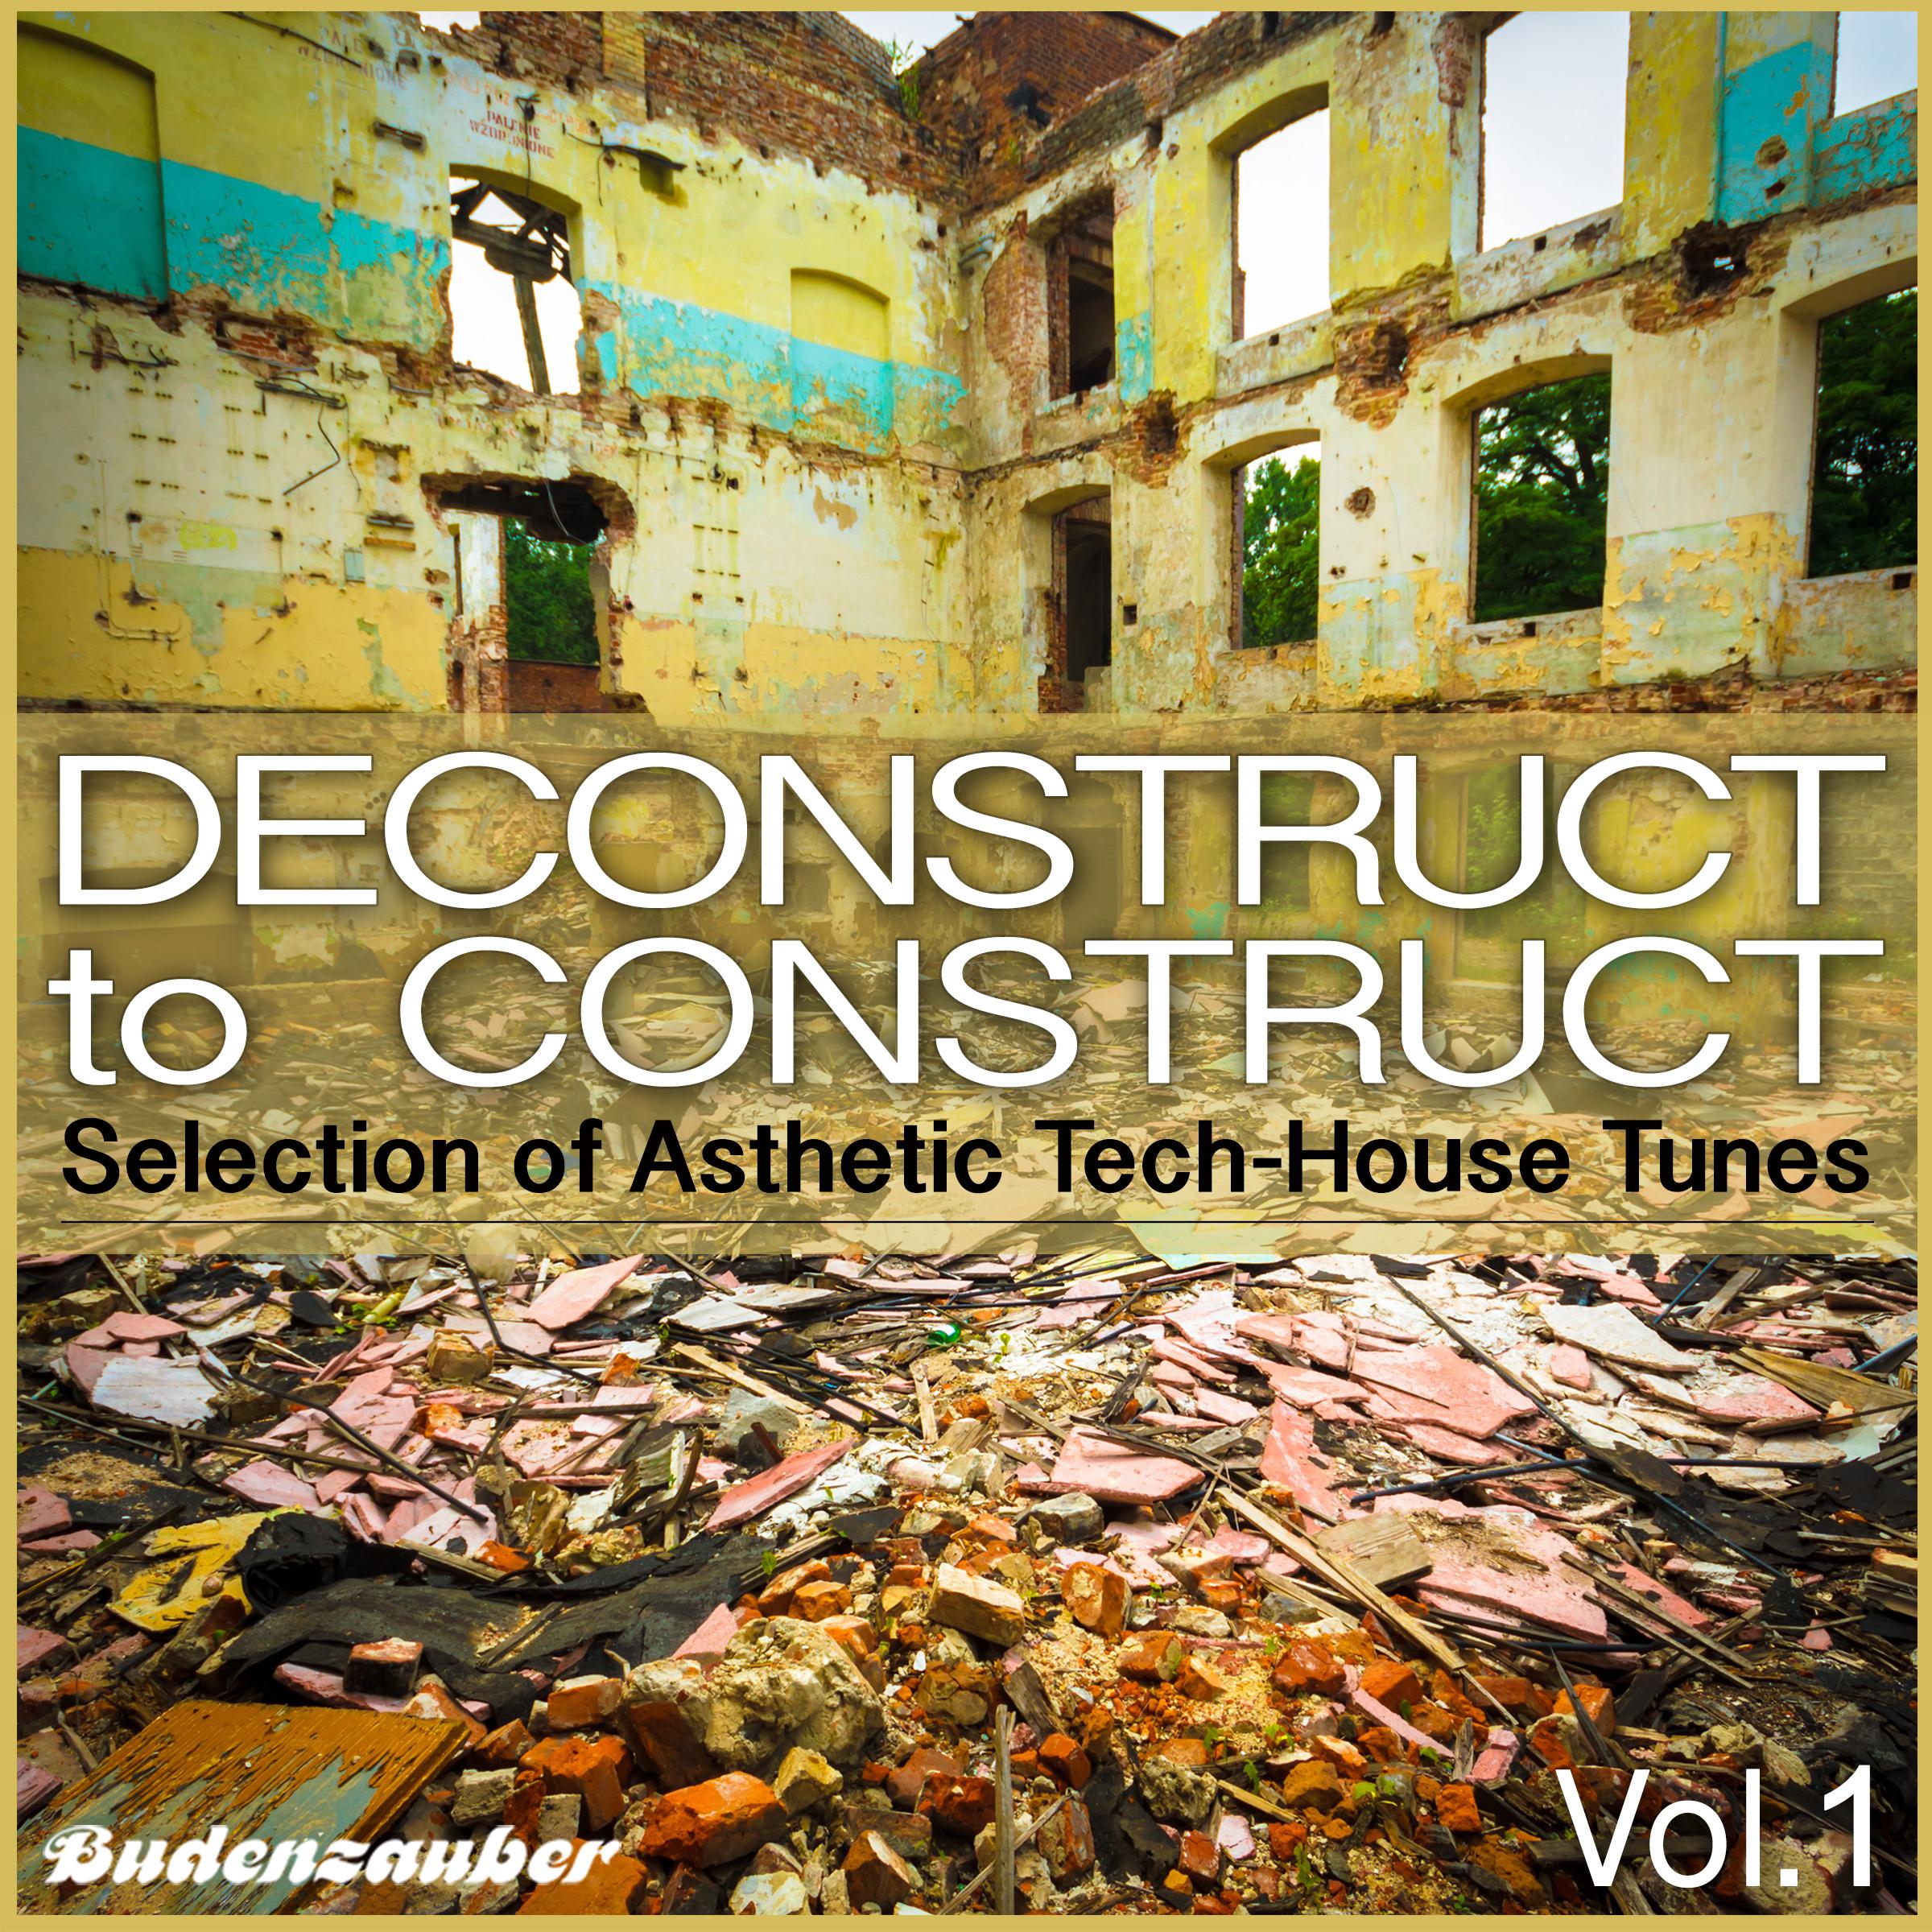 Deconstruct to Construct, Vol. 1 - Selection of Asthetic Tech-House Tunes